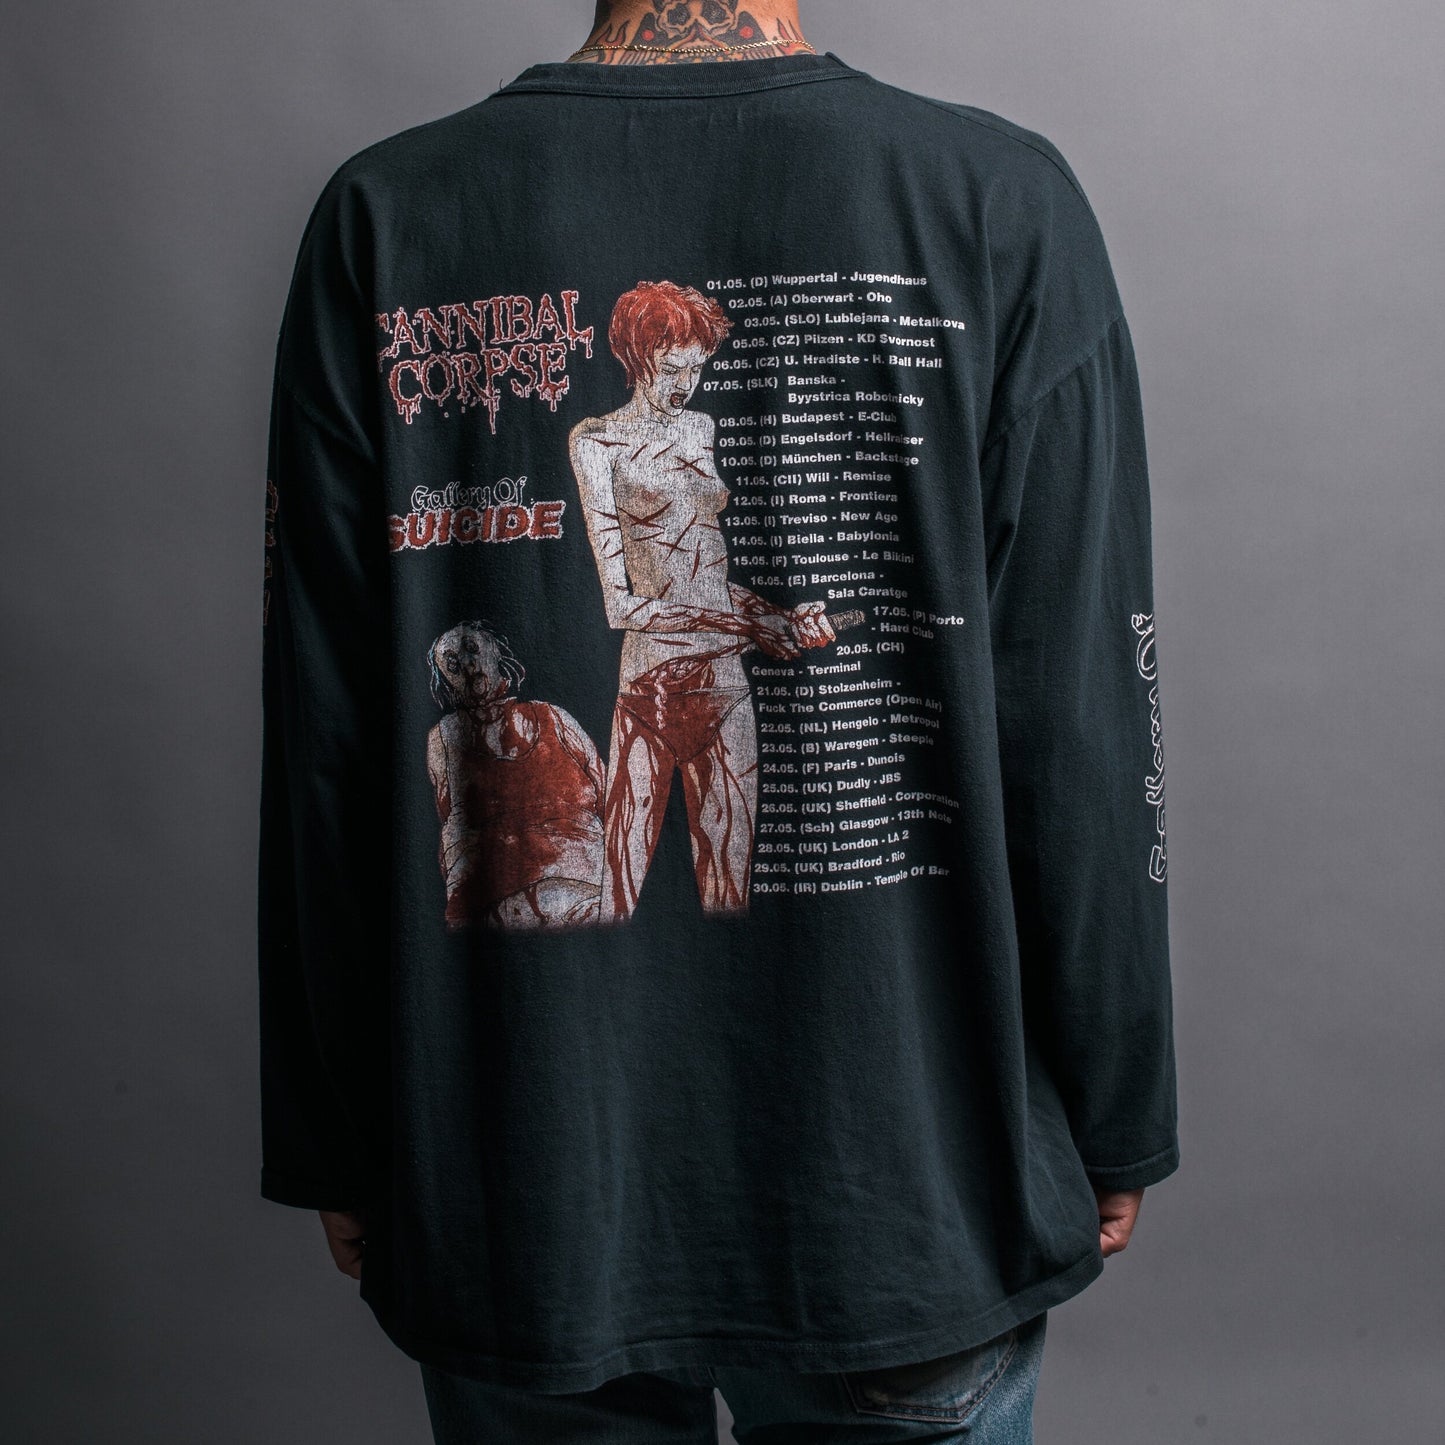 Vintage 90’s Cannibal Corpse Gallery Of Suicide Tour Longsleeve